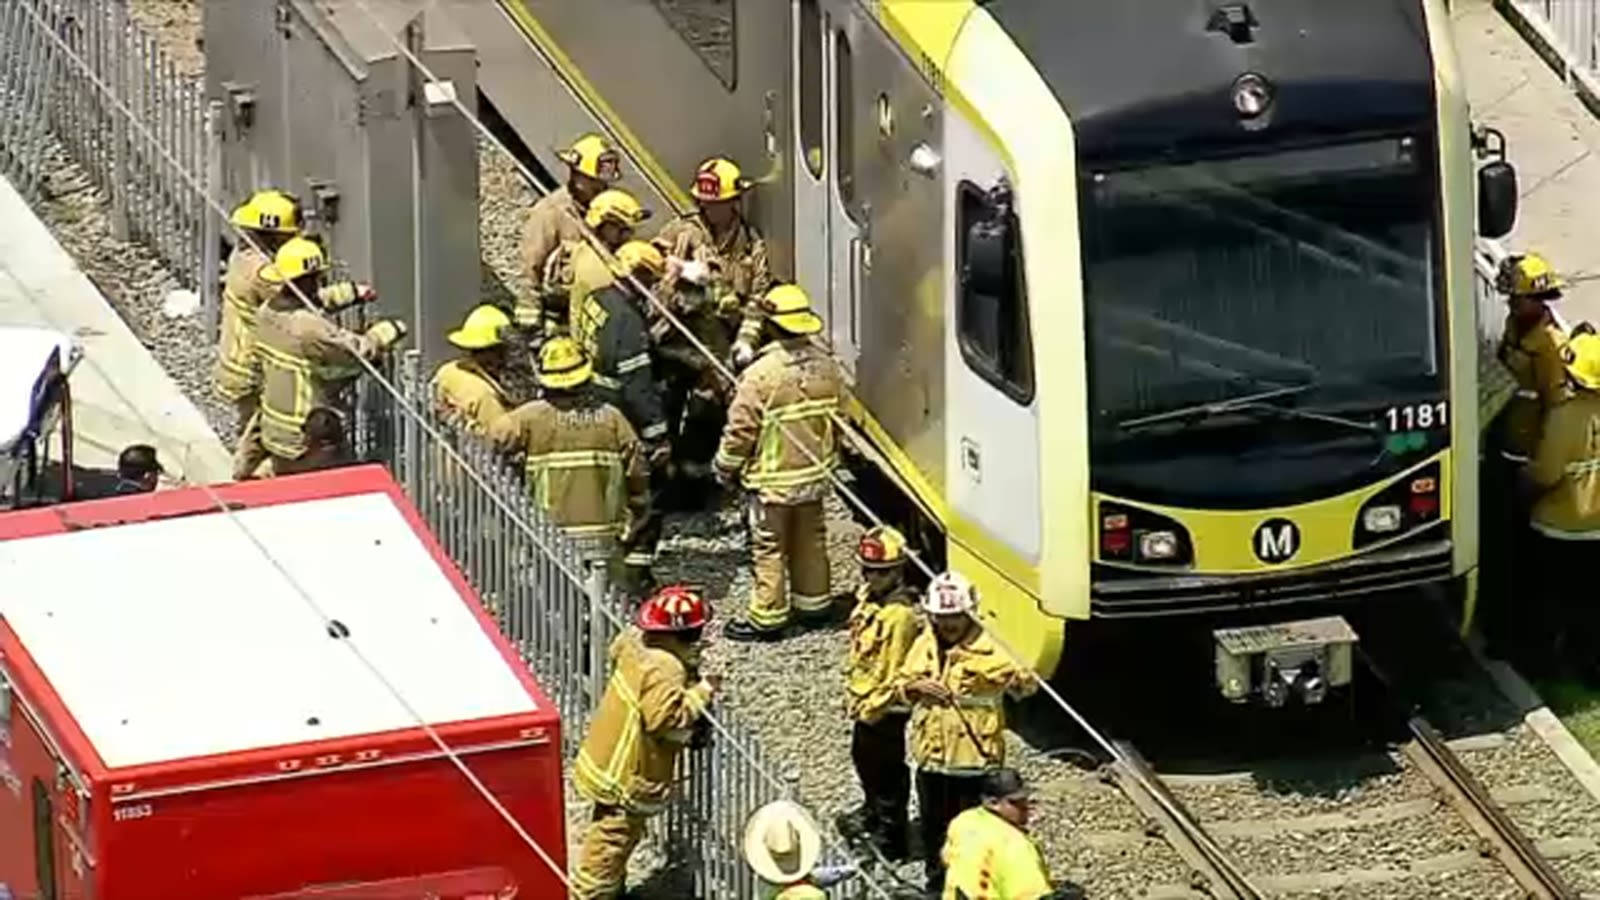 Pedestrian fatally struck by Metro train in South Los Angeles